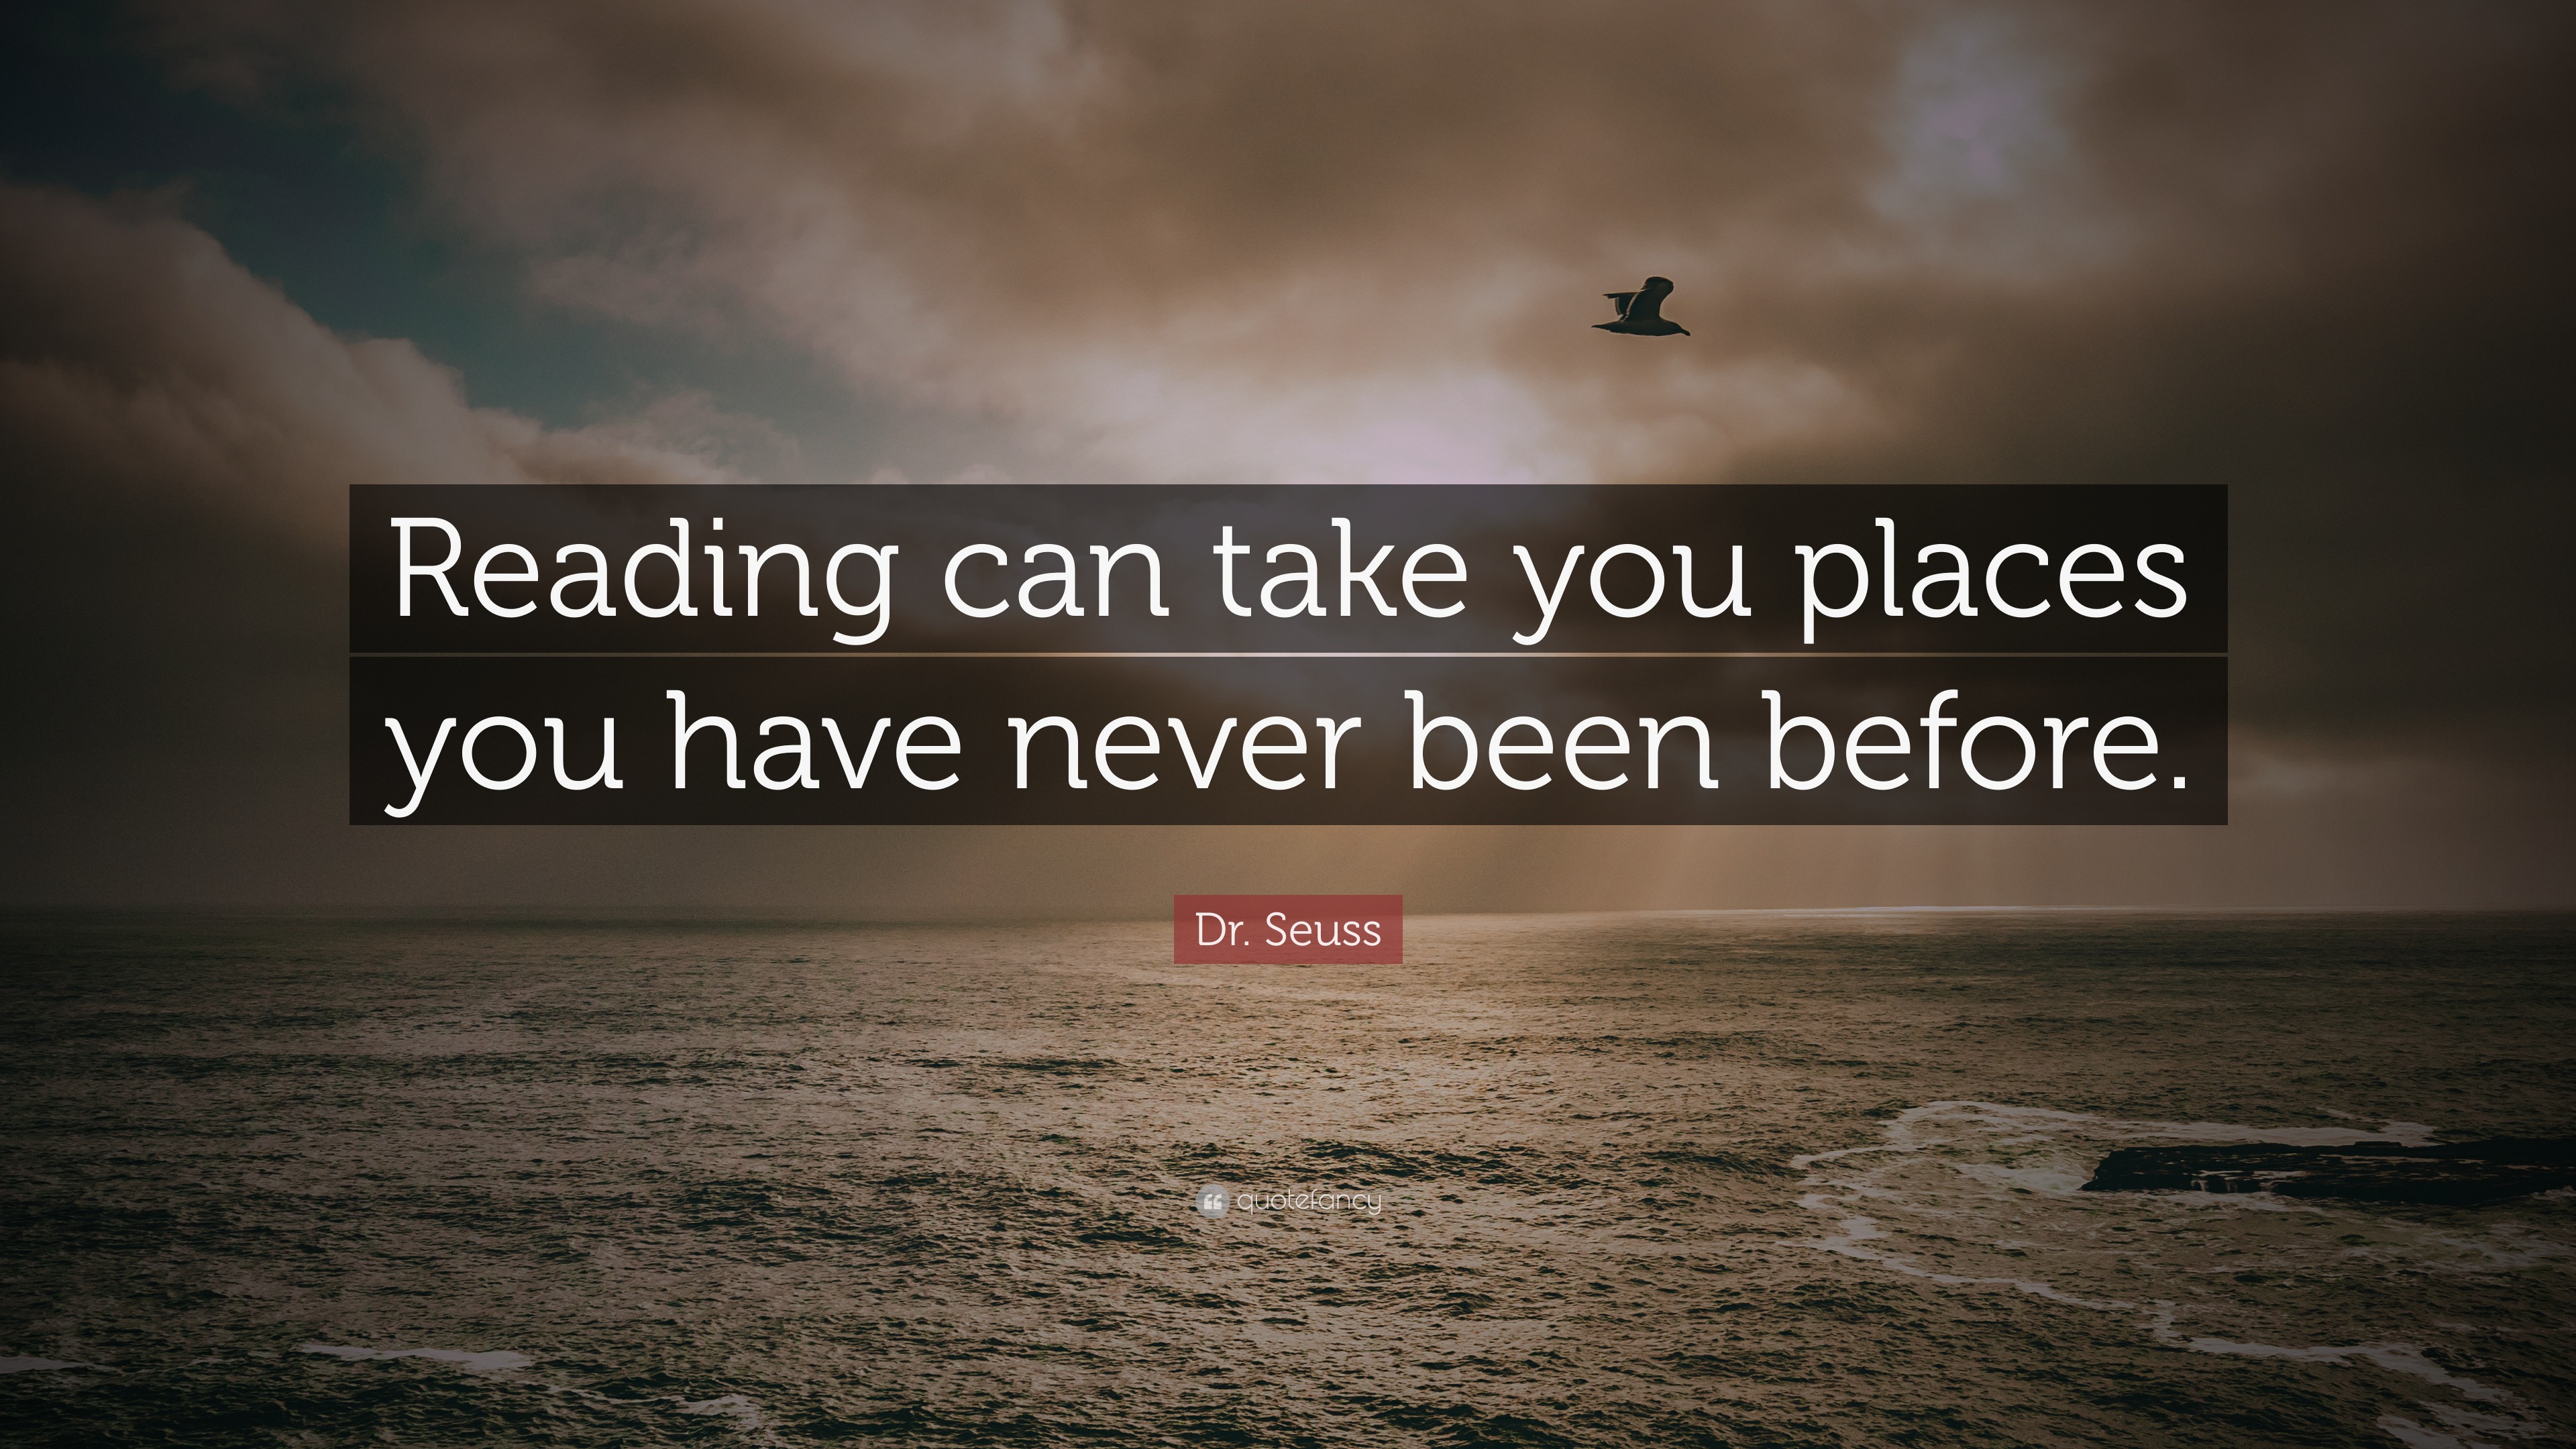 Dr. Seuss Quote: “Reading can take you places you have never been before.”